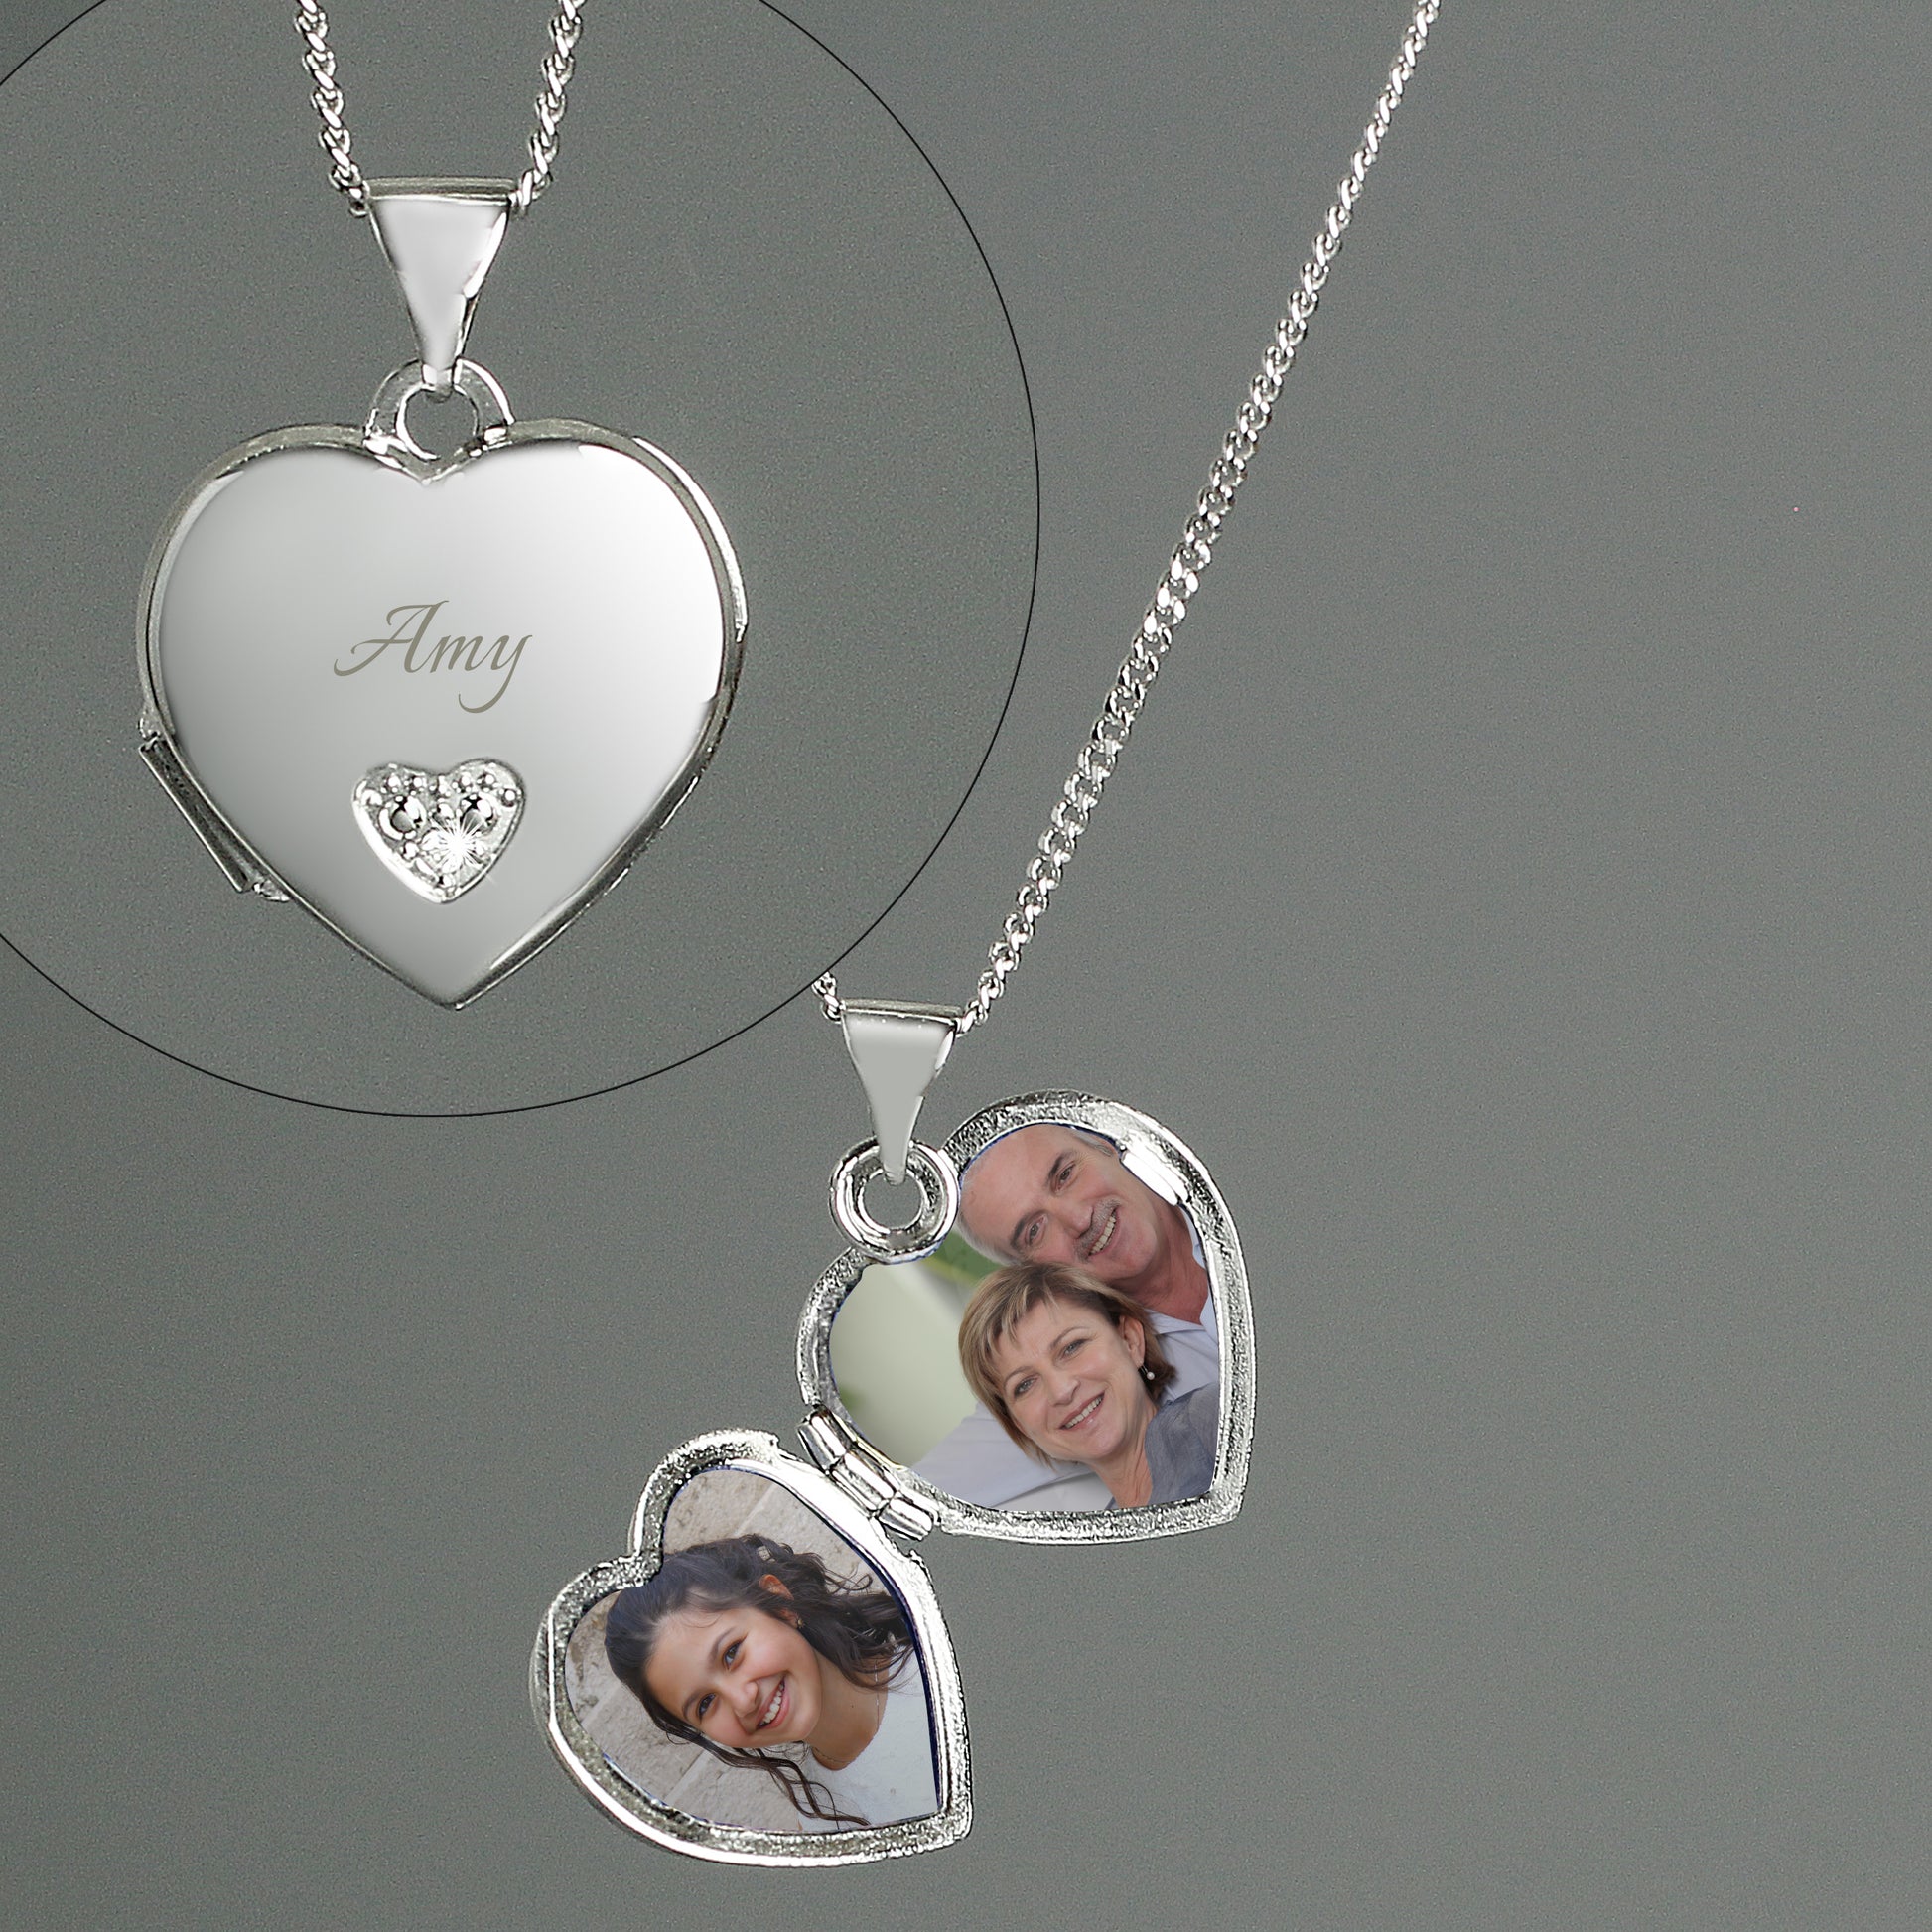 childs sterling silver locket engraved with name and showing interior with two photos